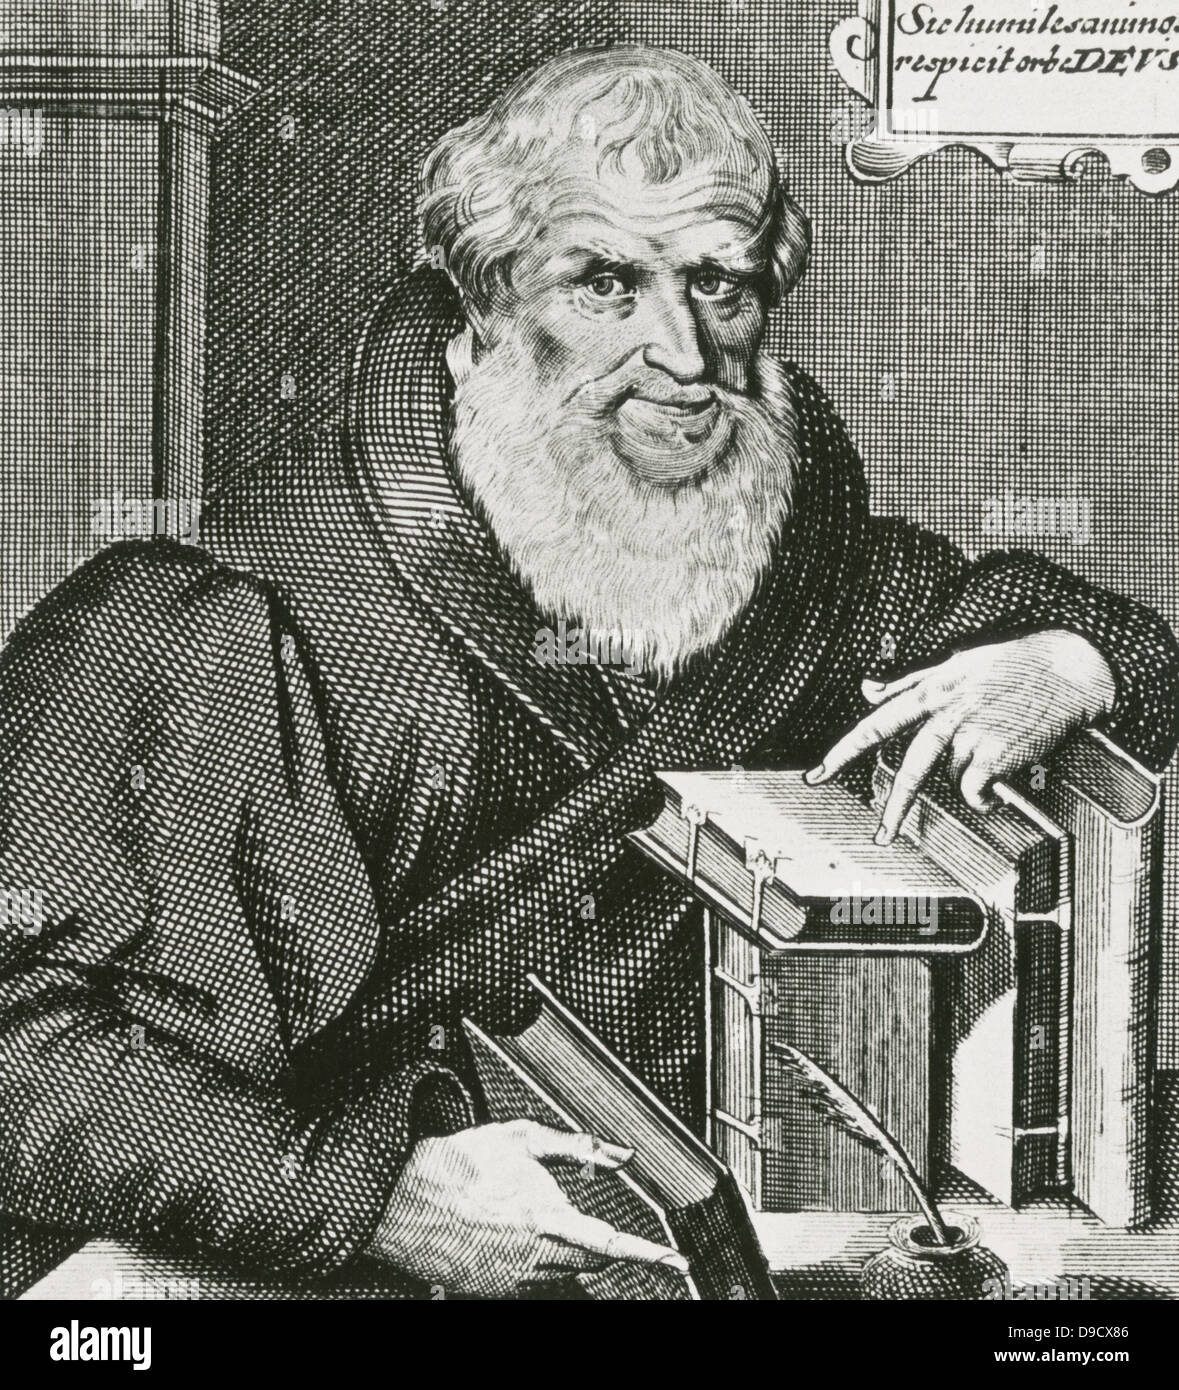 Hans Sachs (1494-1576) German poet and dramatist and composer and shoemaker. The central figure in the opera Die Meisteersinger von Nurnberg, 1886, by Richard Wagner. 18th century engraving. Stock Photo